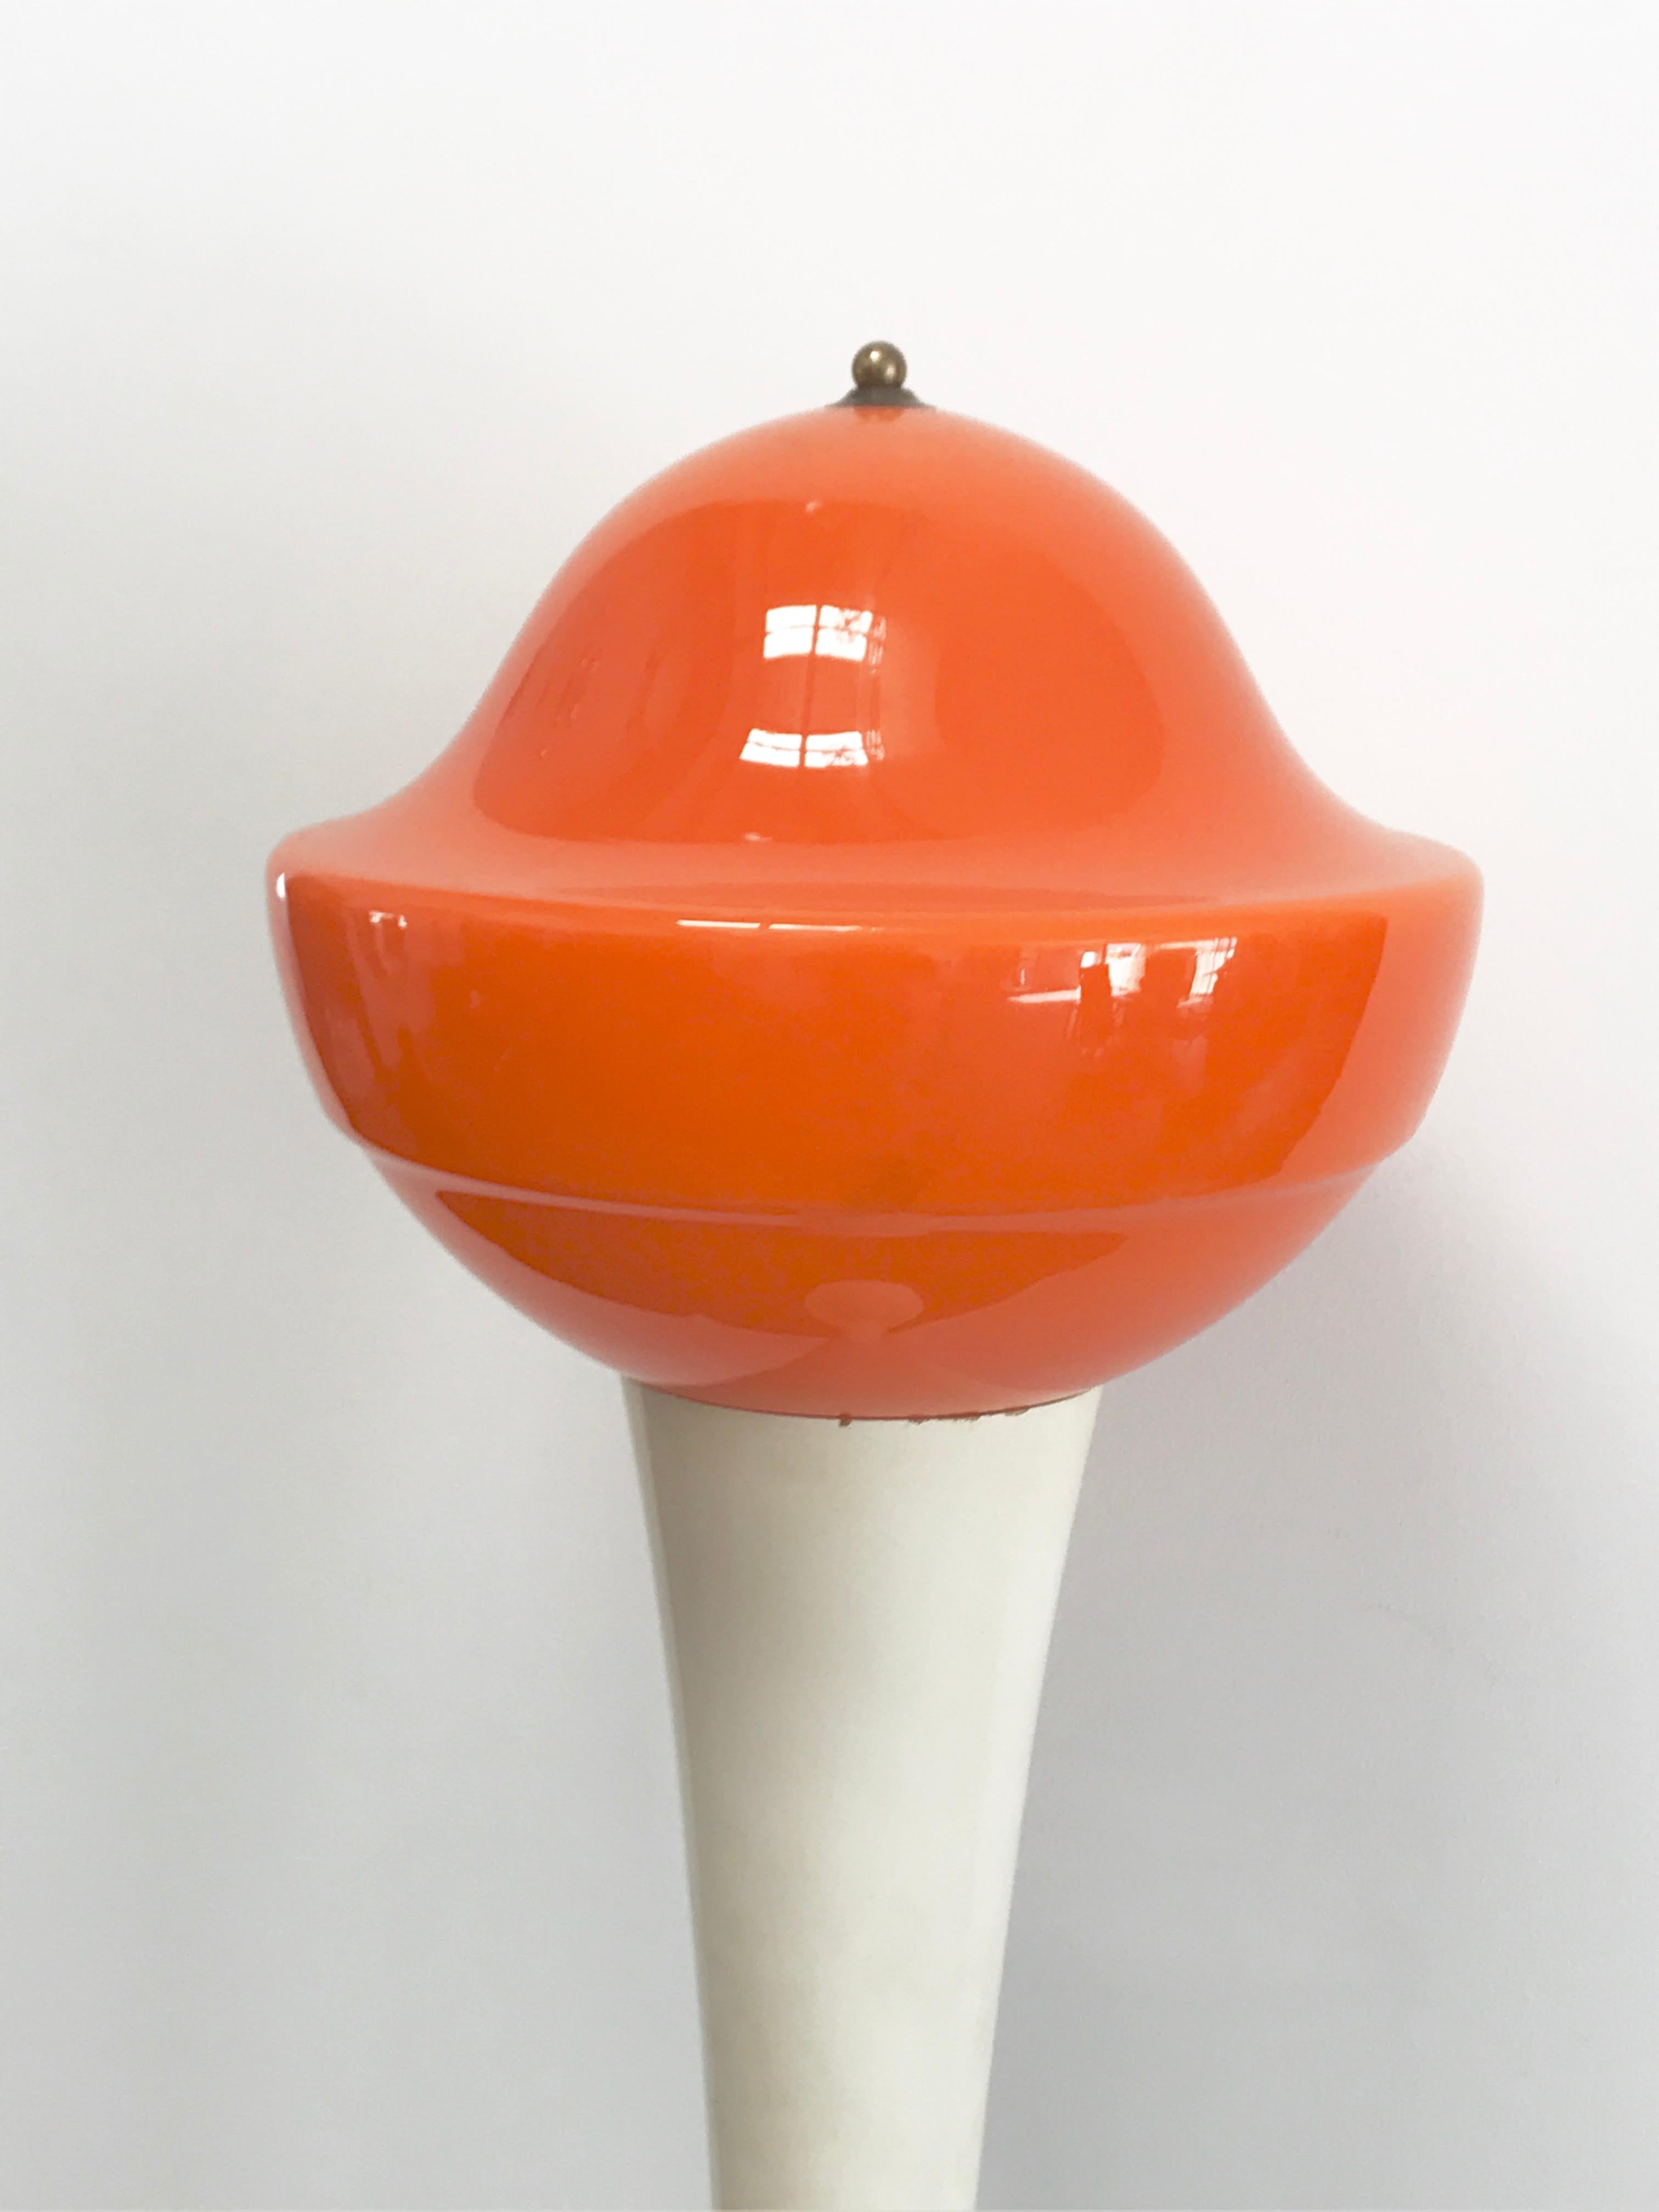 Space Age floor lamp from Italy, shade in Orange Murano glass and body in wood and a brass rig in the middle and on the top of the head of the lamp to keep the all the parts together.